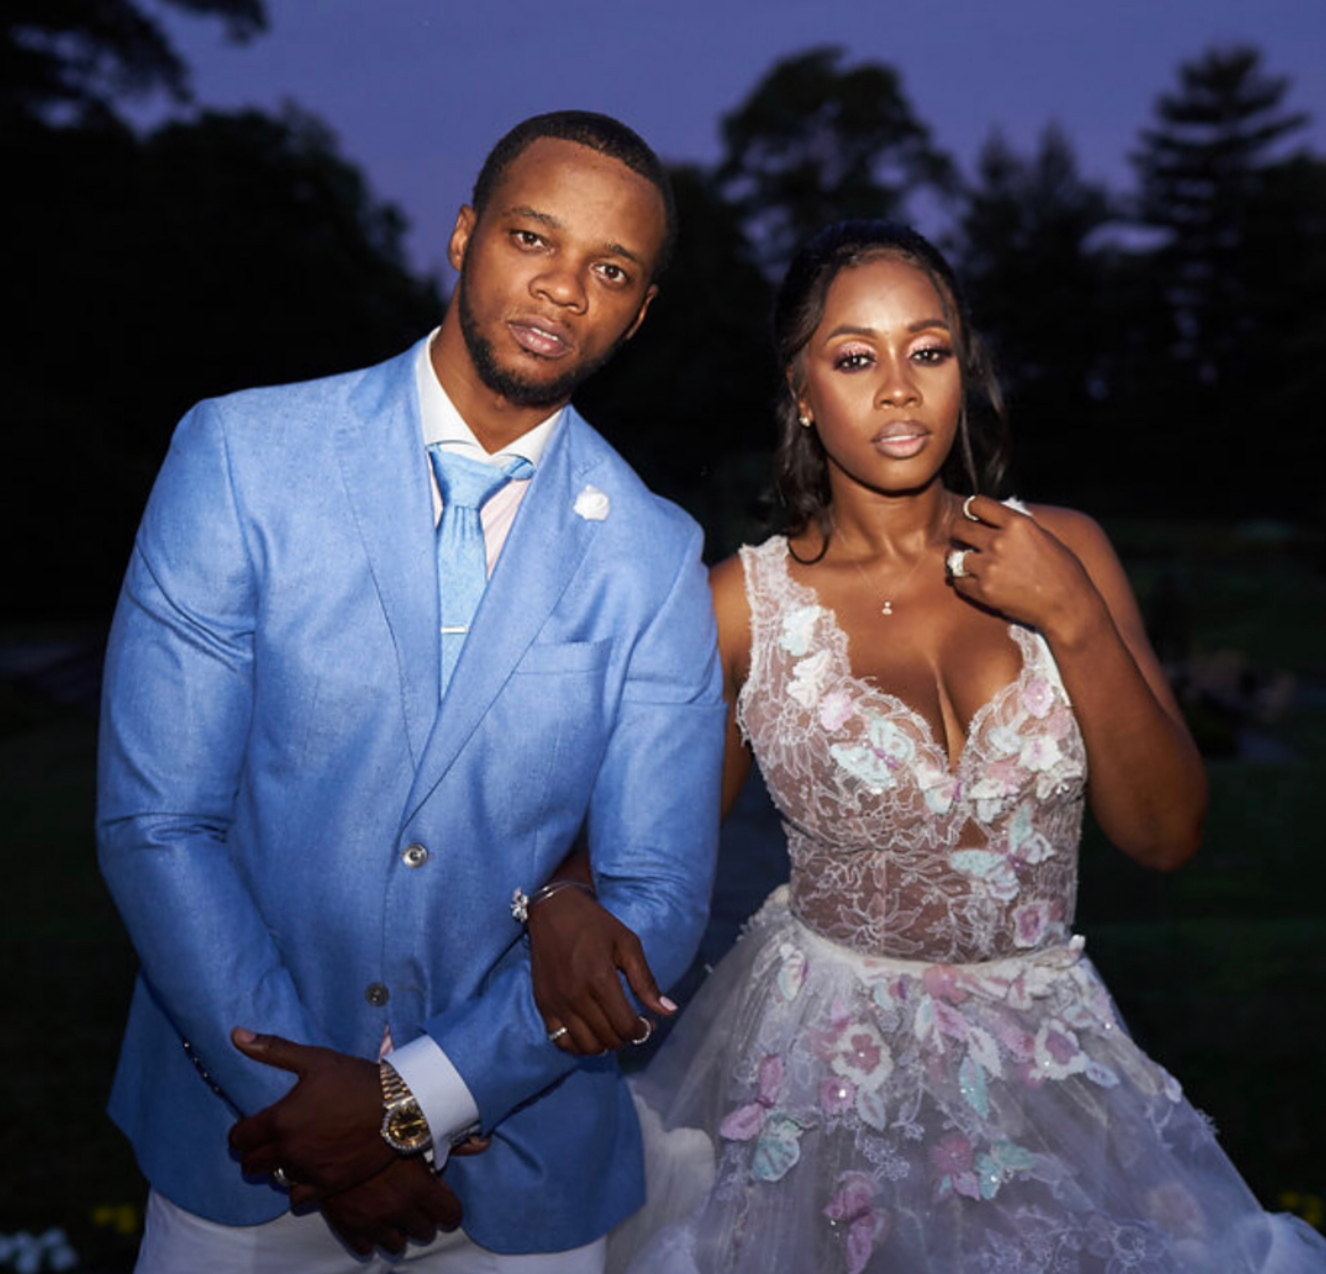 Remy Ma Teases Husband Papoose About Being The Pregnancy Police During Their Doctor's Visit